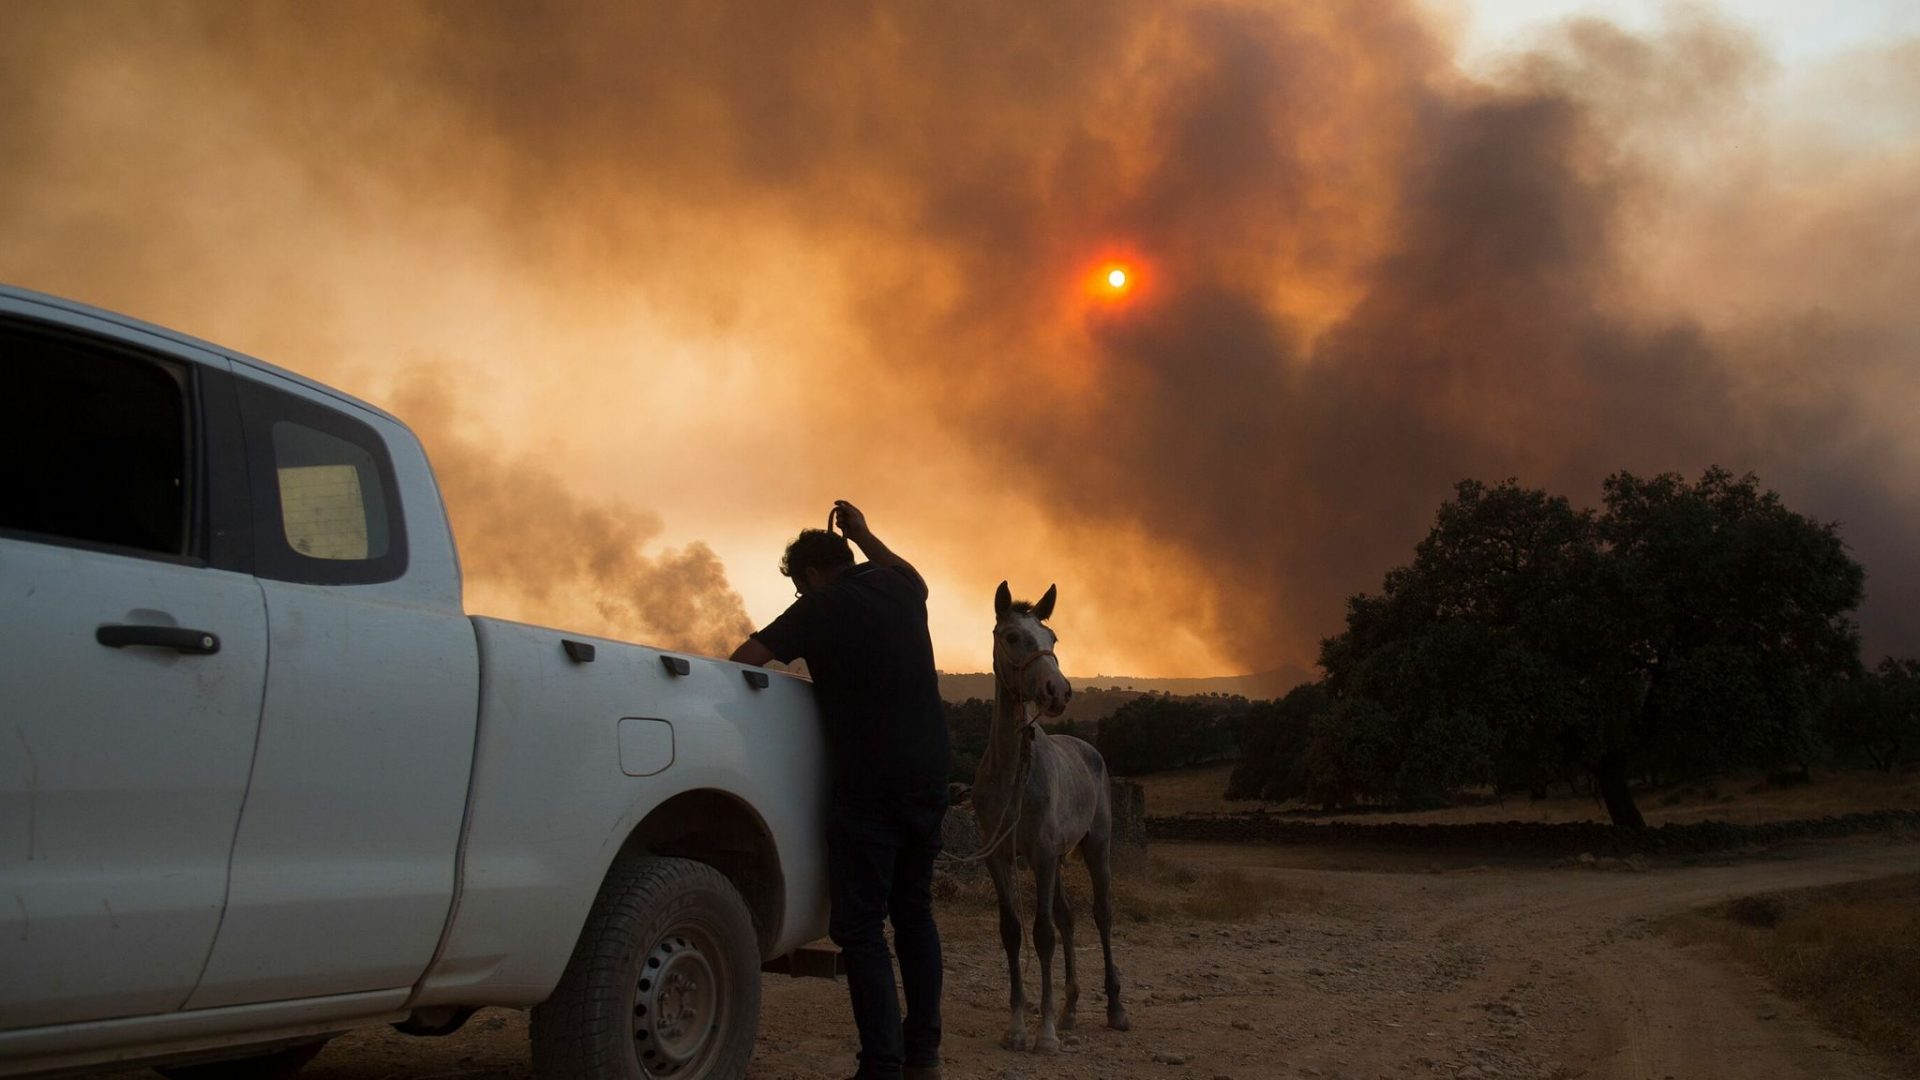 Apocalyptic fires prompt evacuation of more than 3,000 people in Spain